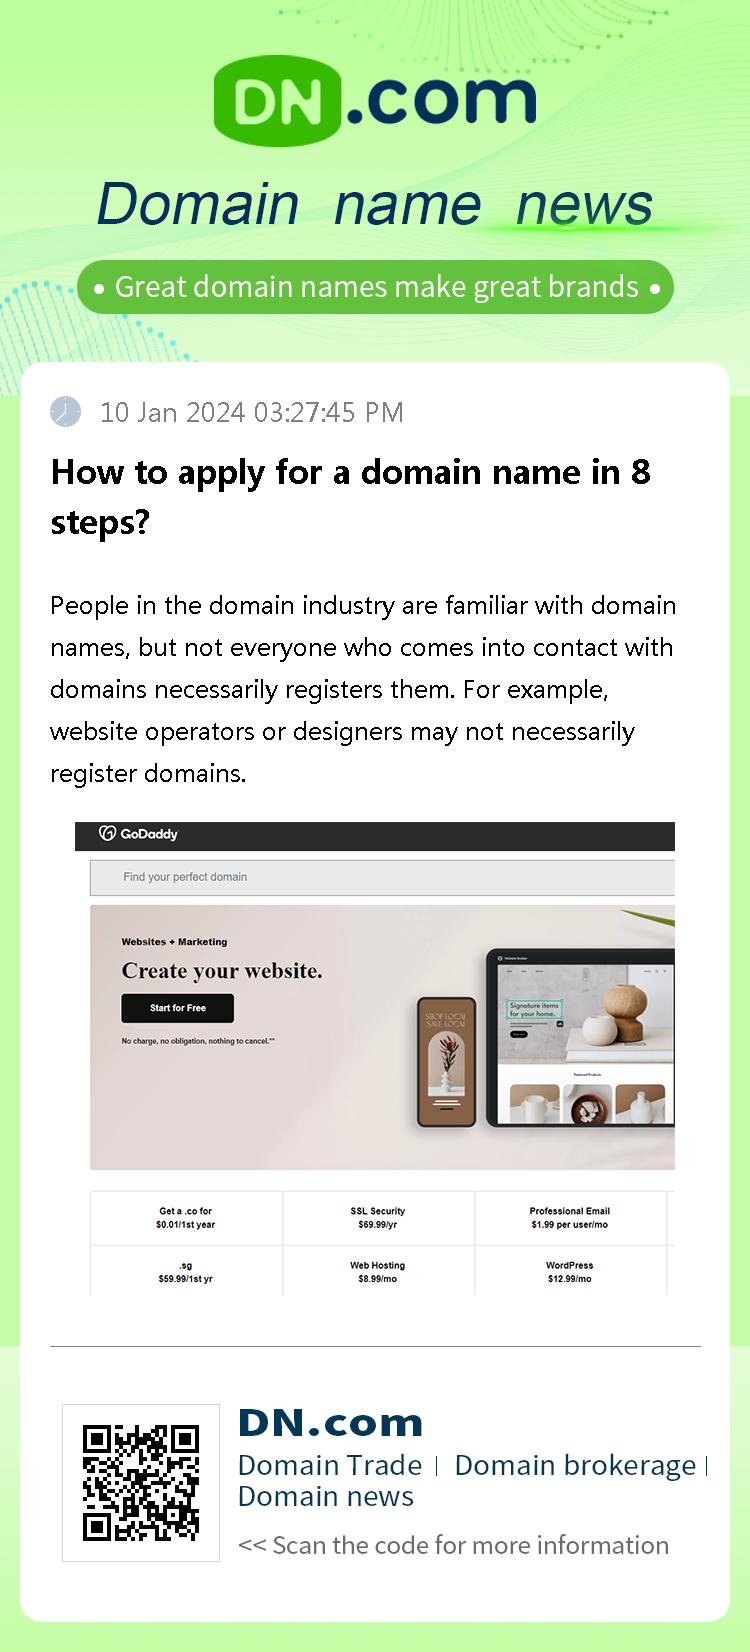 How to apply for a domain name in 8 steps?